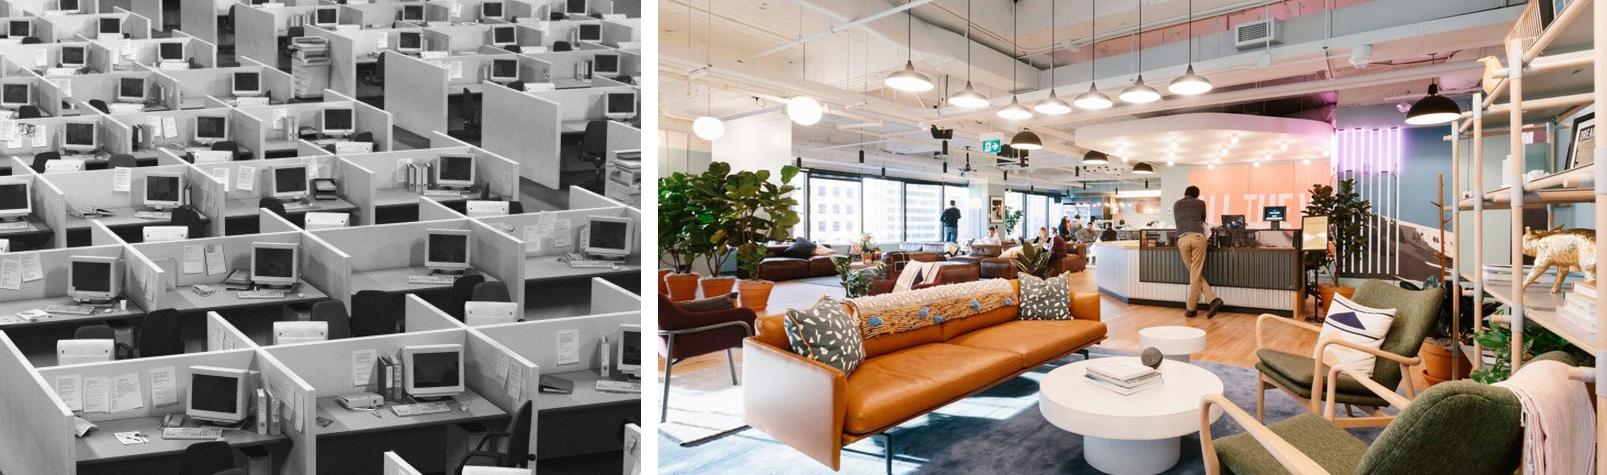 Typical office VS WeWork China office